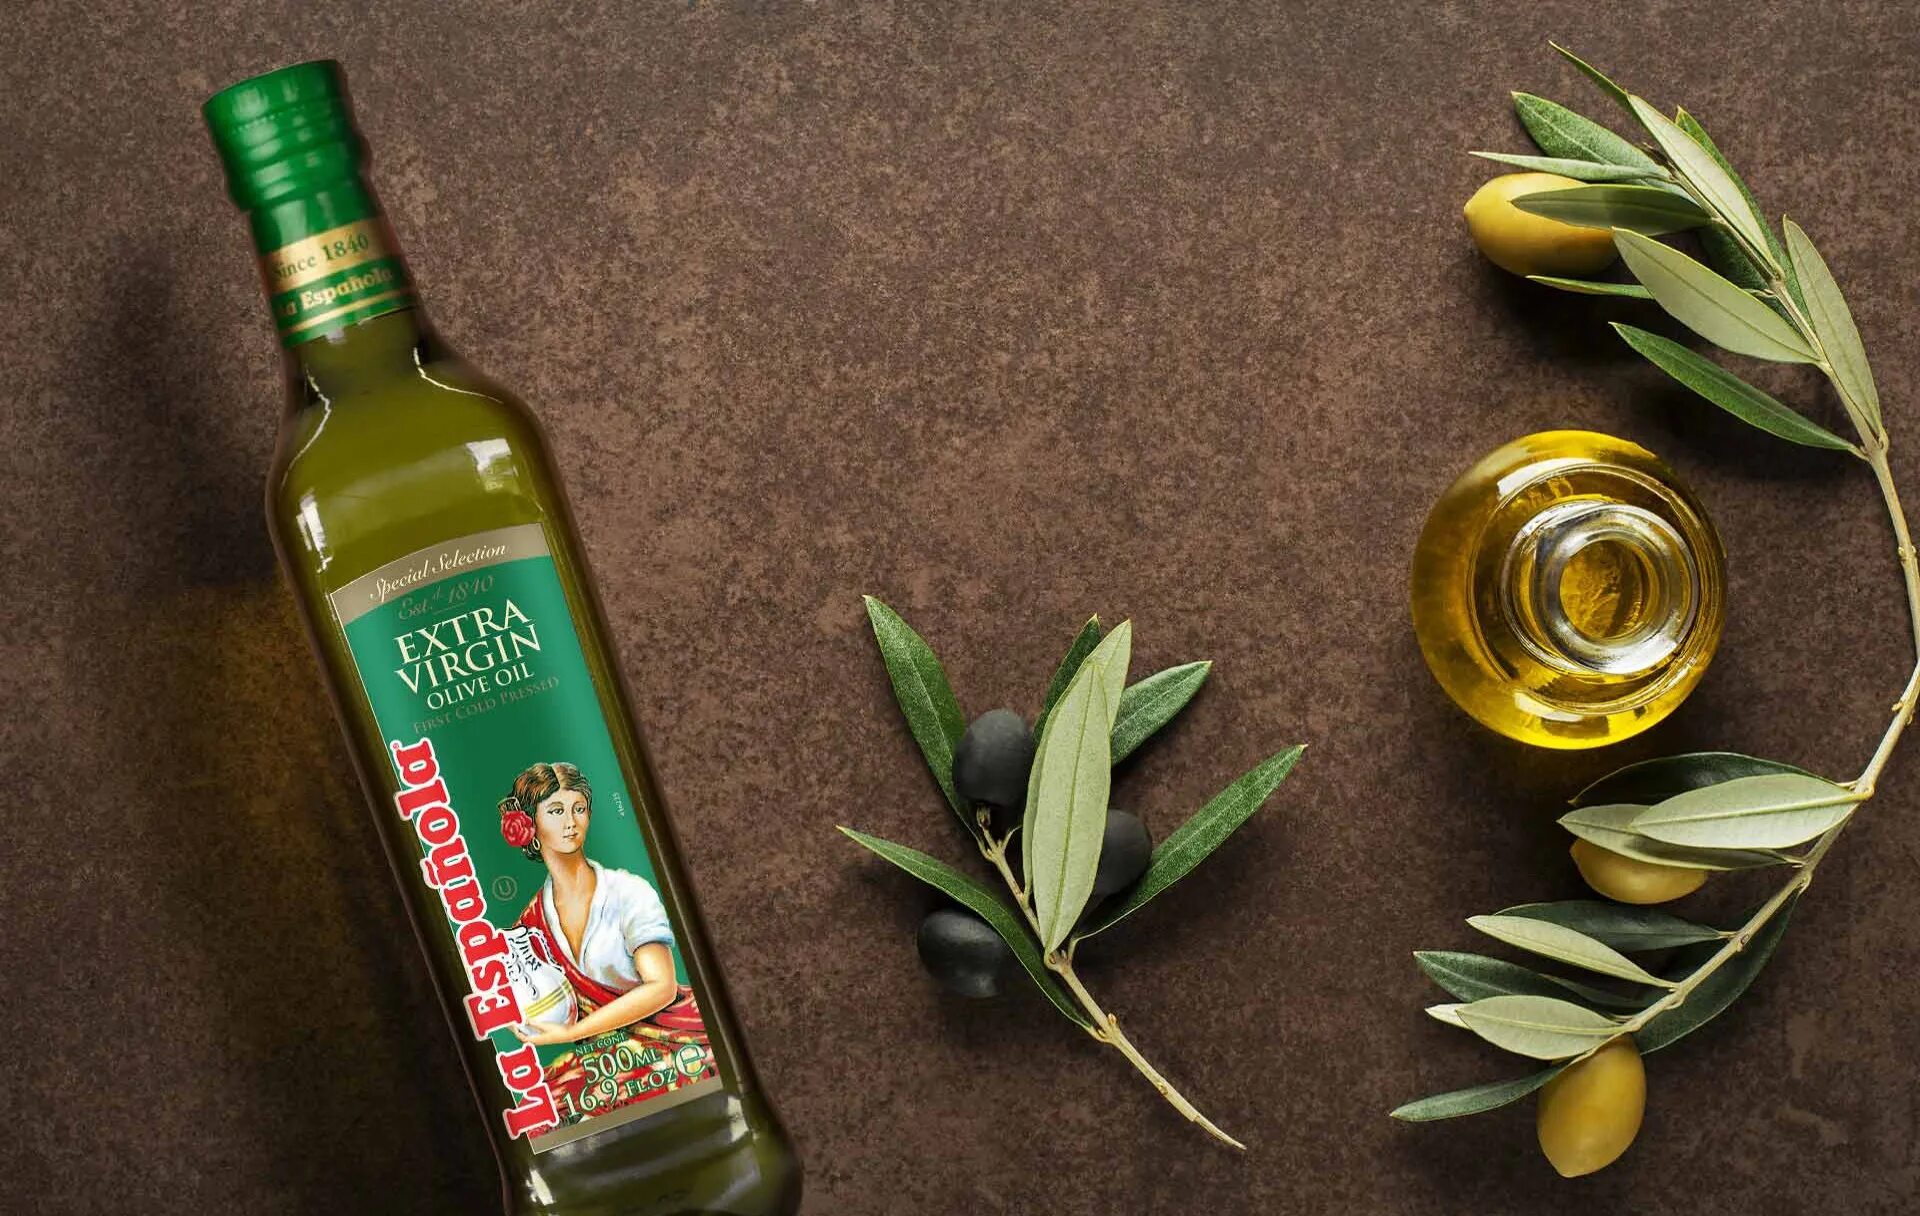 Olive Oil масло оливковое. San Michele Olive Oil. Олив Ойл масло оливковое. Оливки и оливковое масло.